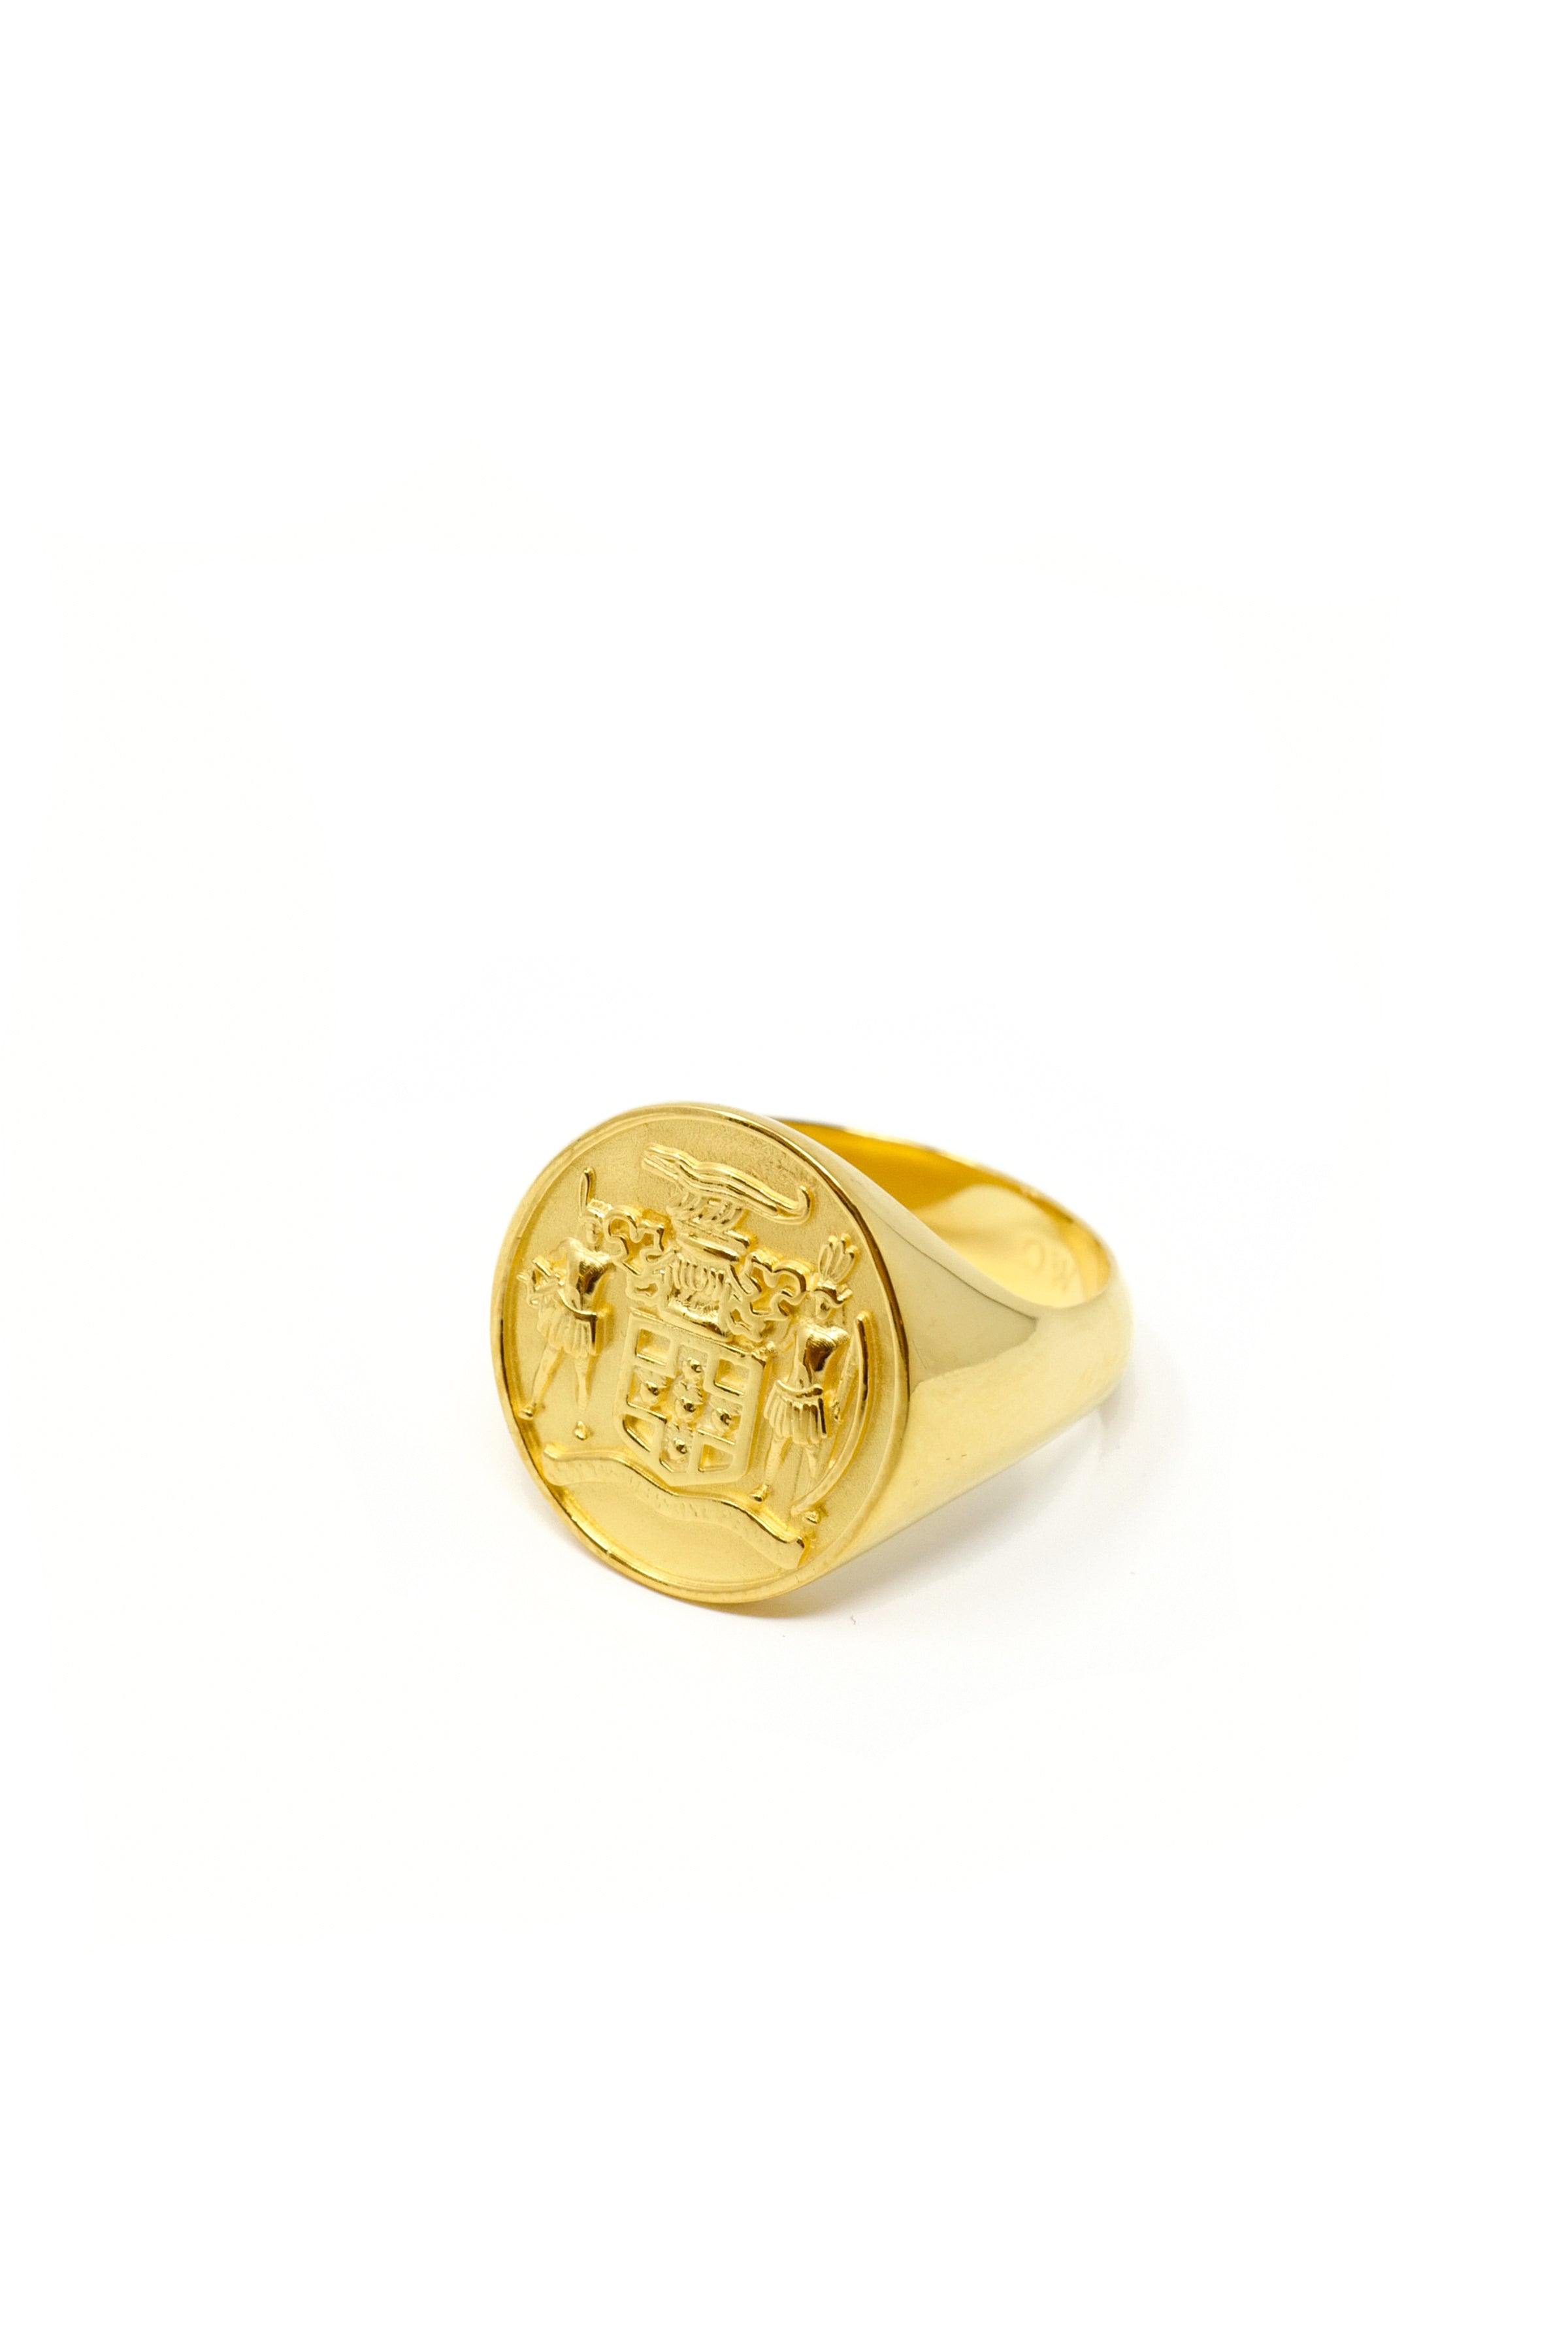 Buy Coat of Arms Ring, Men Signet Ring, Gold Signet Ring, Armorial Ring,  Wax Seal Ring, Family Crest Ring, Personalized Ring, Chevaliere Homme  Online in India - Etsy